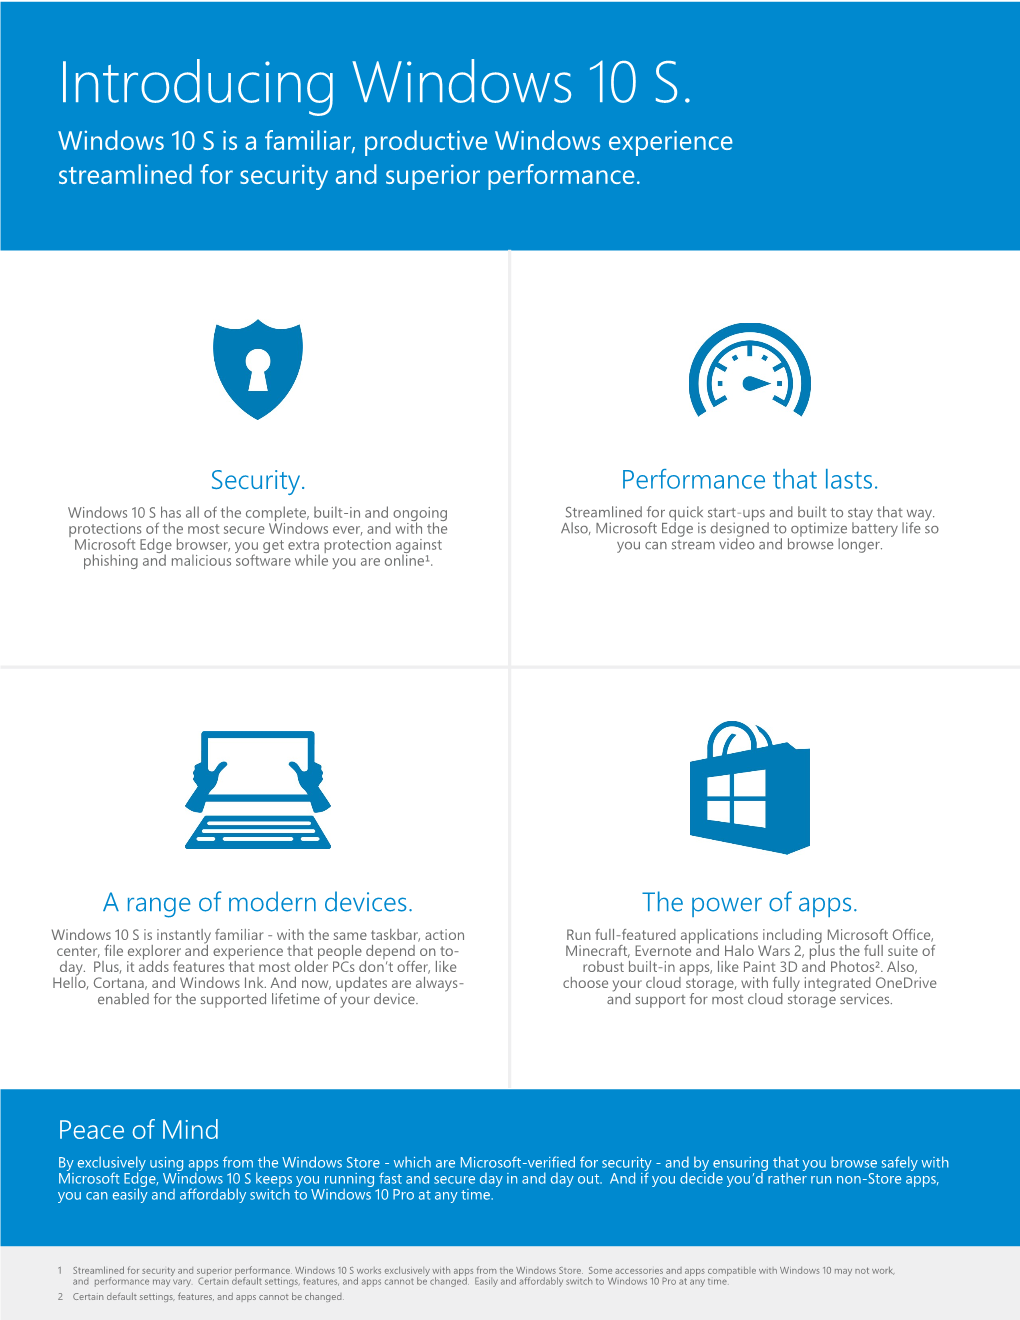 Introducing Windows 10 S. Windows 10 S Is a Familiar, Productive Windows Experience Streamlined for Security and Superior Performance